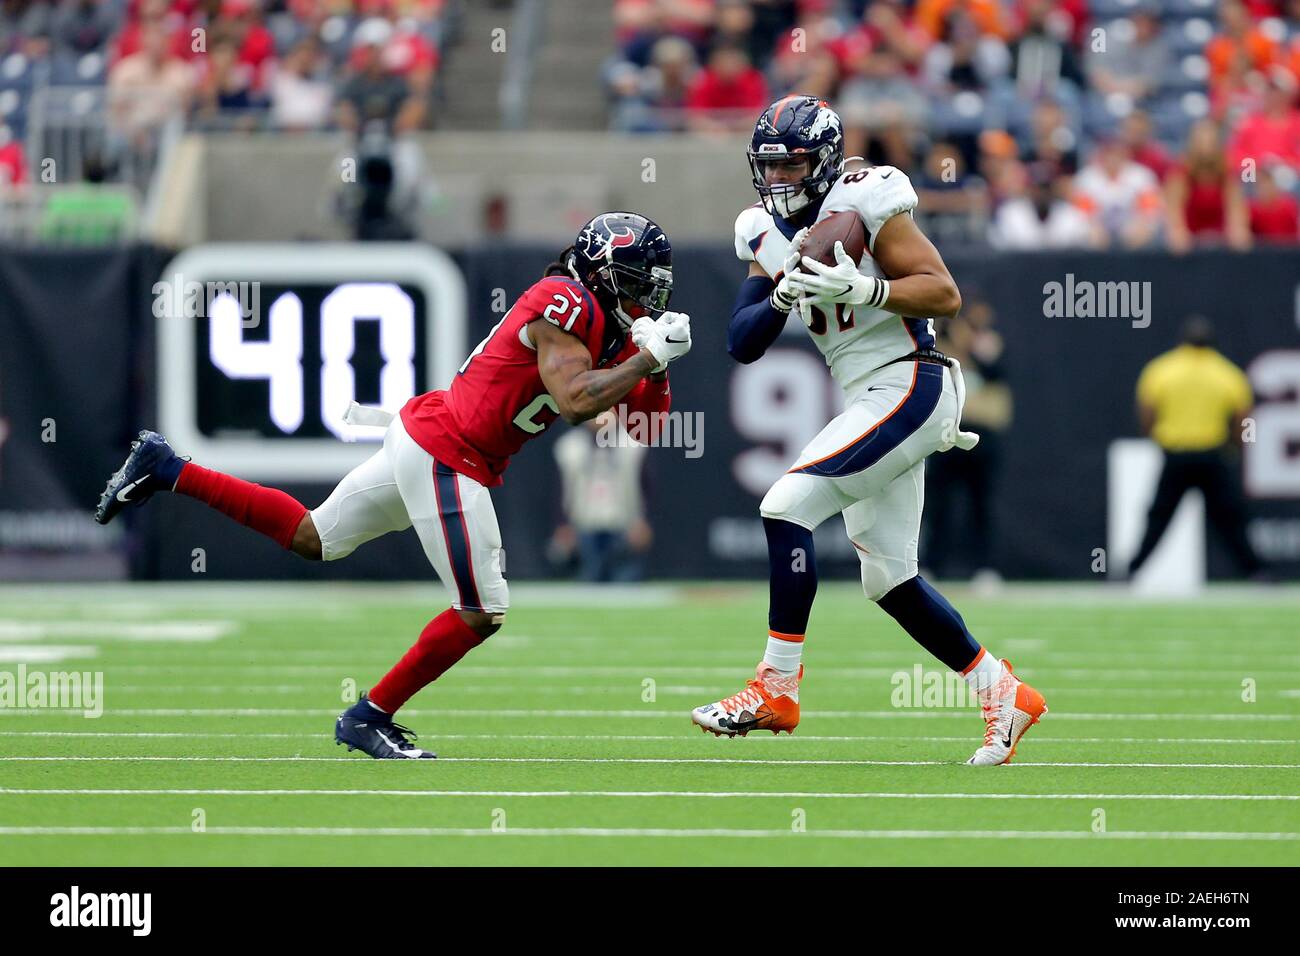 December 8, 2019, Houston, Texas, U.S: Denver Broncos tight end Noah Fant (87) makes a catch while Houston Texans cornerback Bradley Roby (21) defends during the NFL regular season game between the Houston Texans and the Denver Broncos at NRG Stadium in Houston, TX on December 8, 2019. (Credit Image: © Erik Williams/ZUMA Wire) Stock Photo